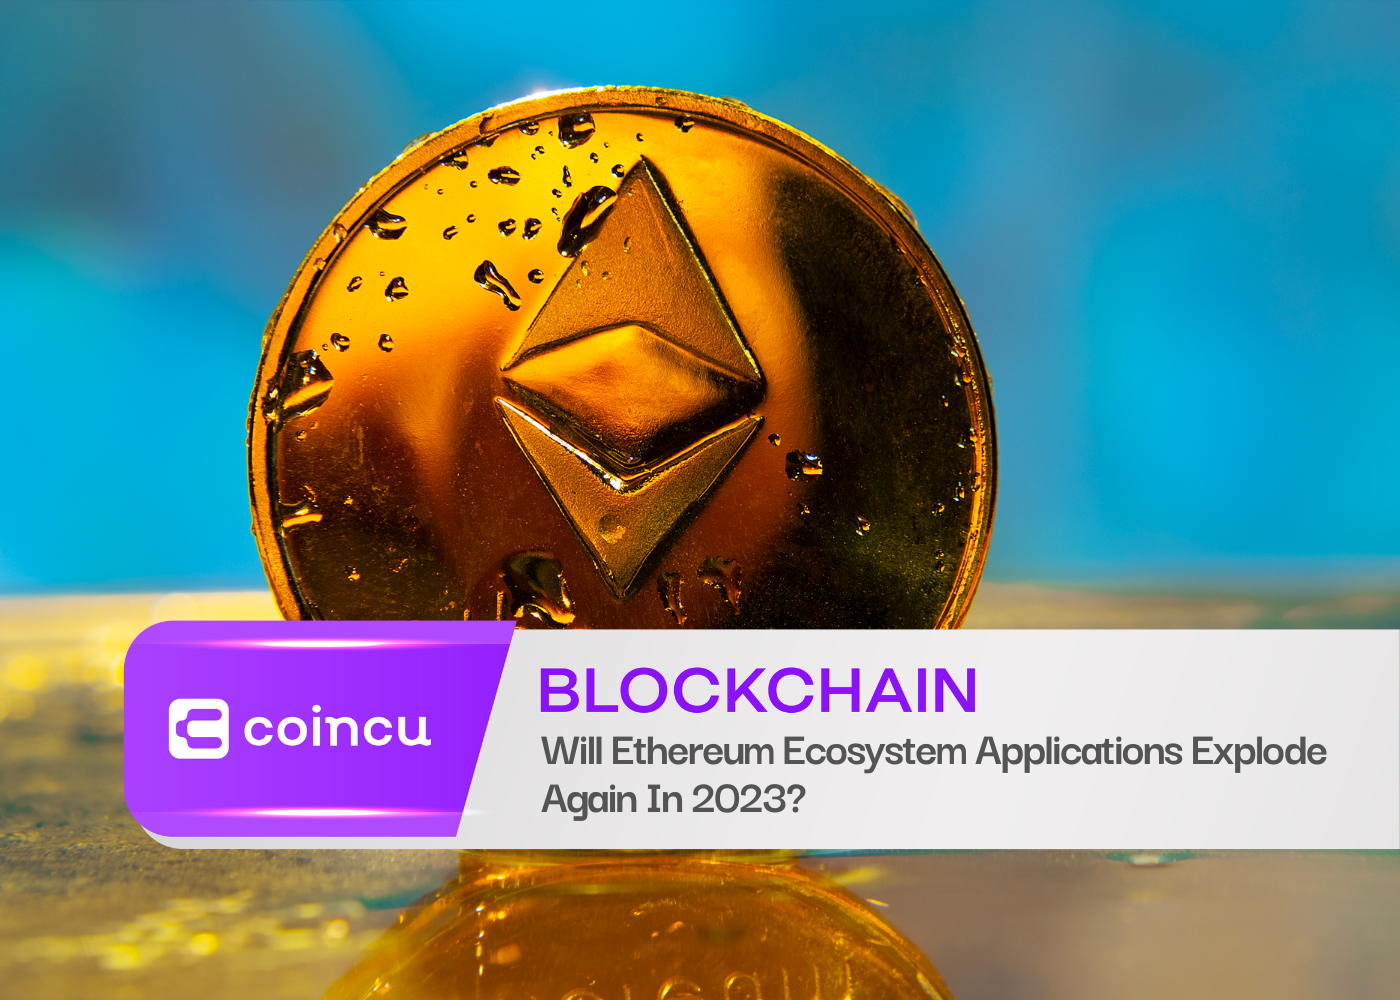 Will Ethereum Ecosystem Applications Explode Again In 2023?